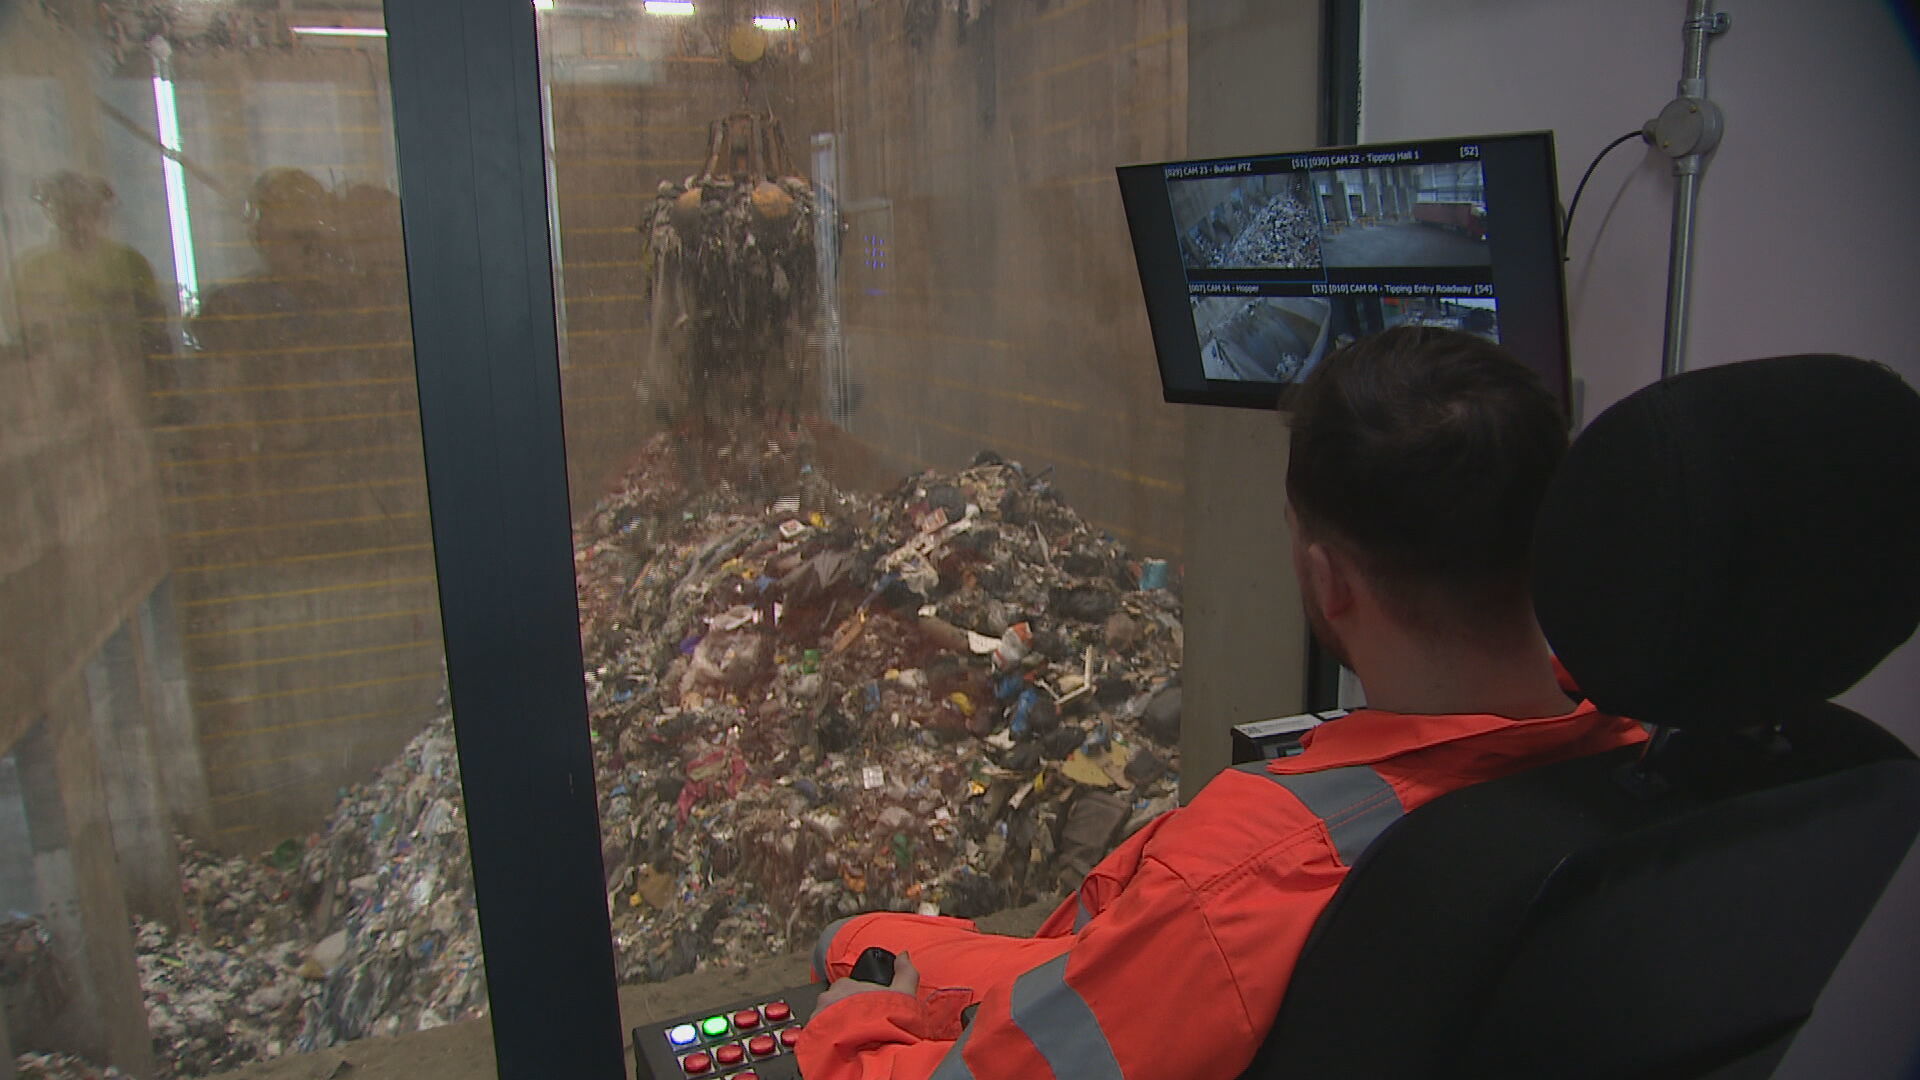 Incinerator in action - but new waste-to-energy facilities are set to be banned